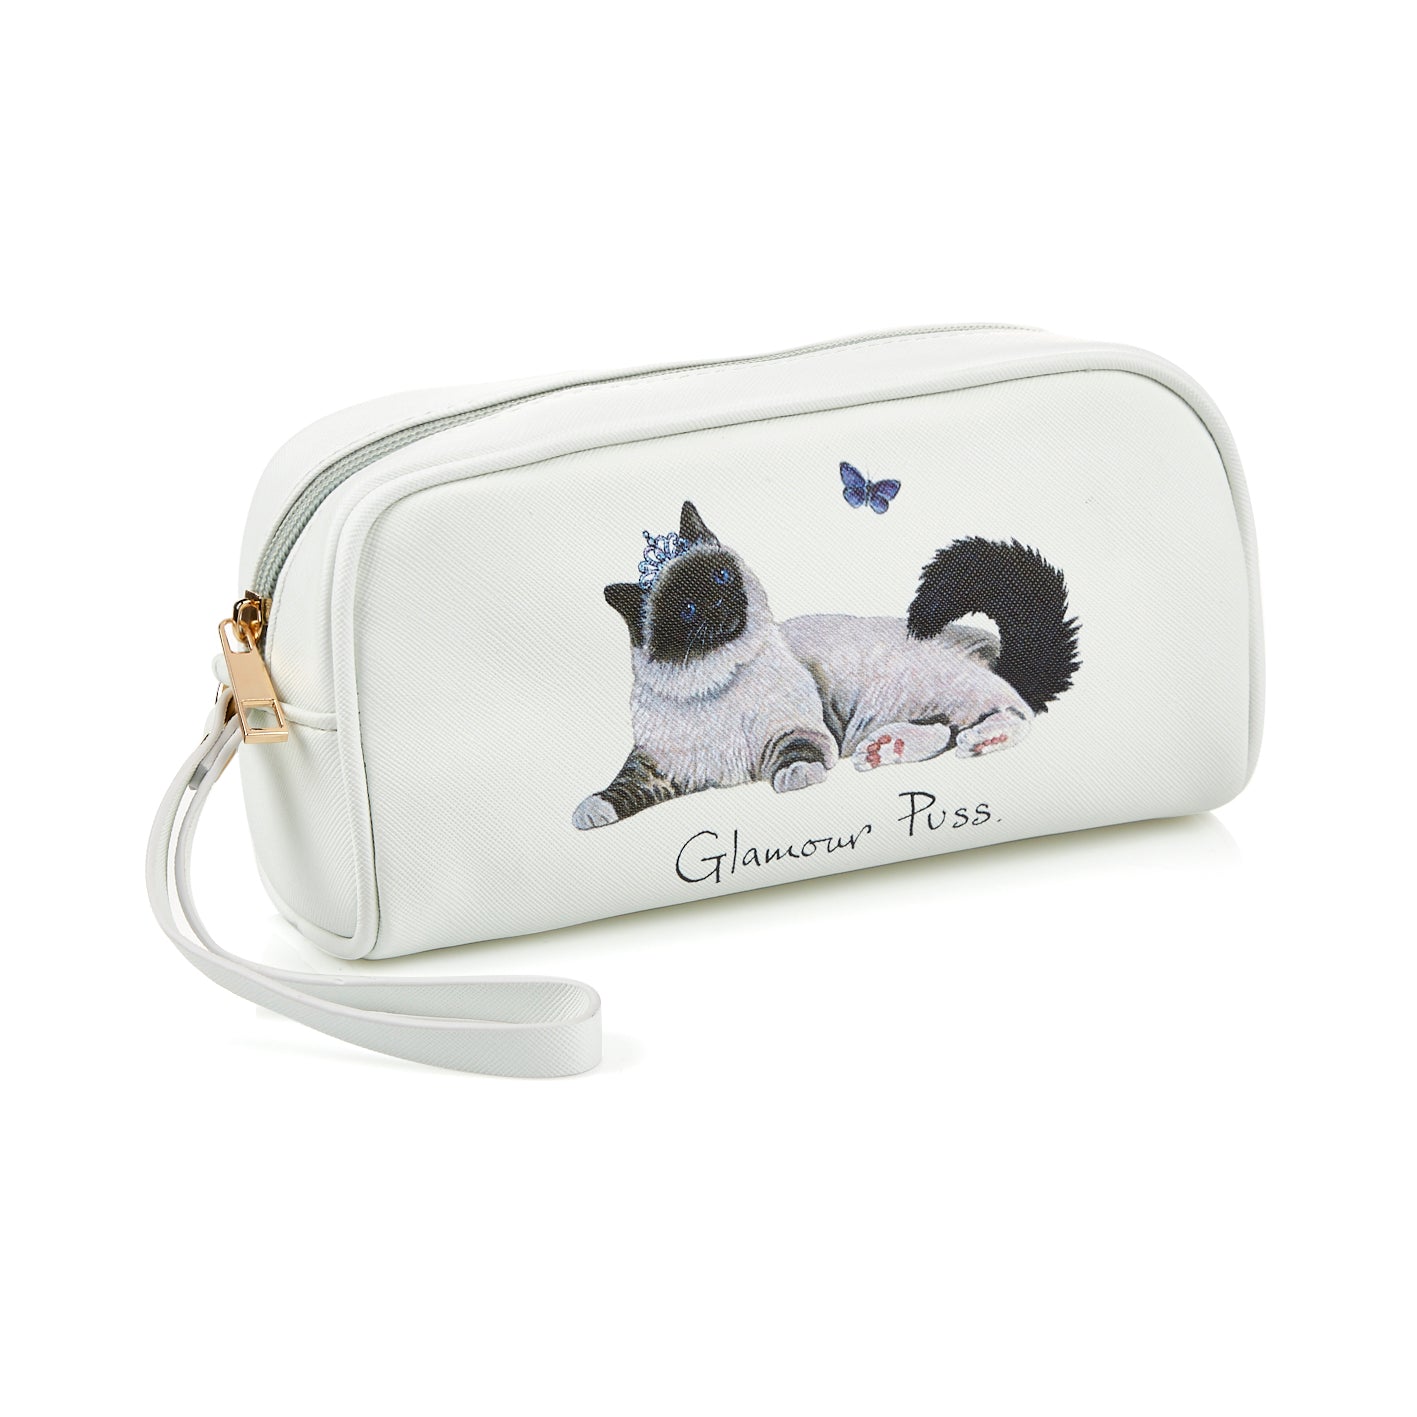 Glamour Puss Accessory Bag